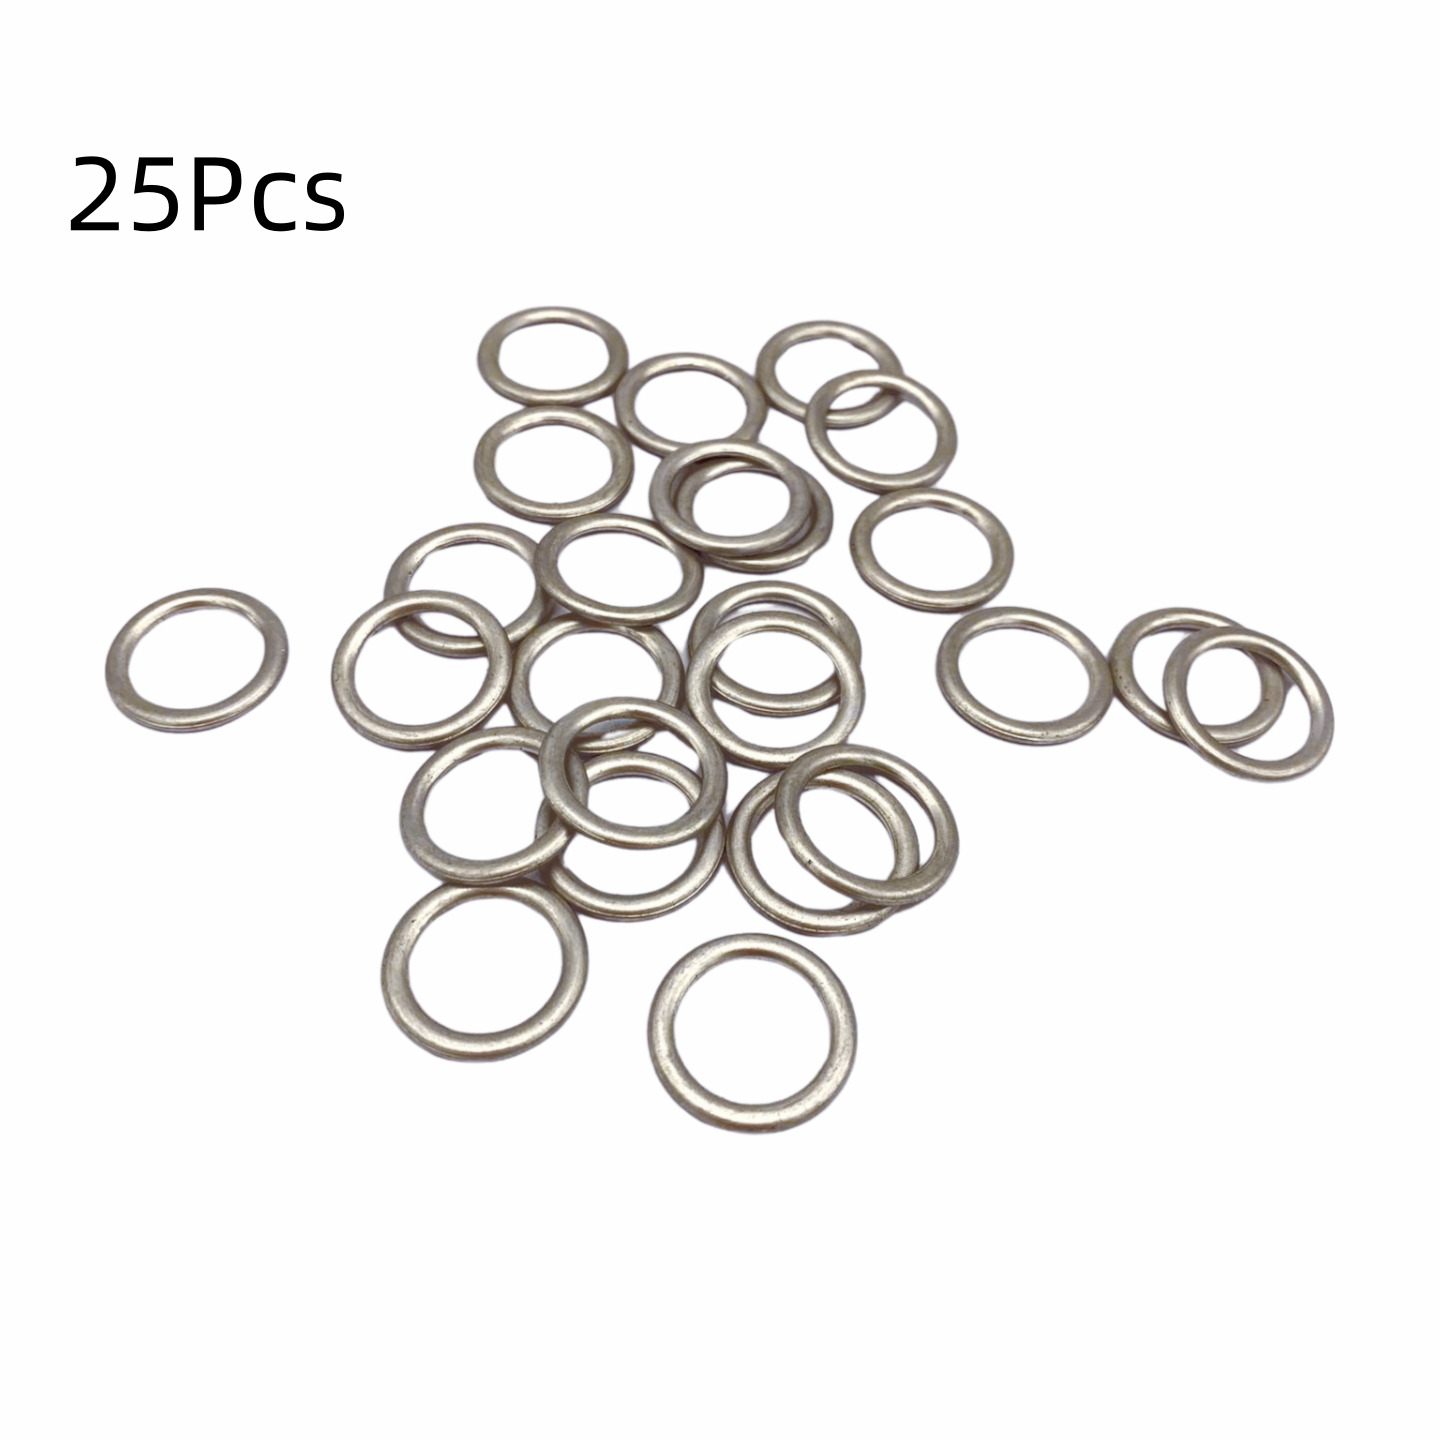 25x M14 Crush Washer Oil Drain Plug Gasket N0138157 Fits For Volkswagen Audi